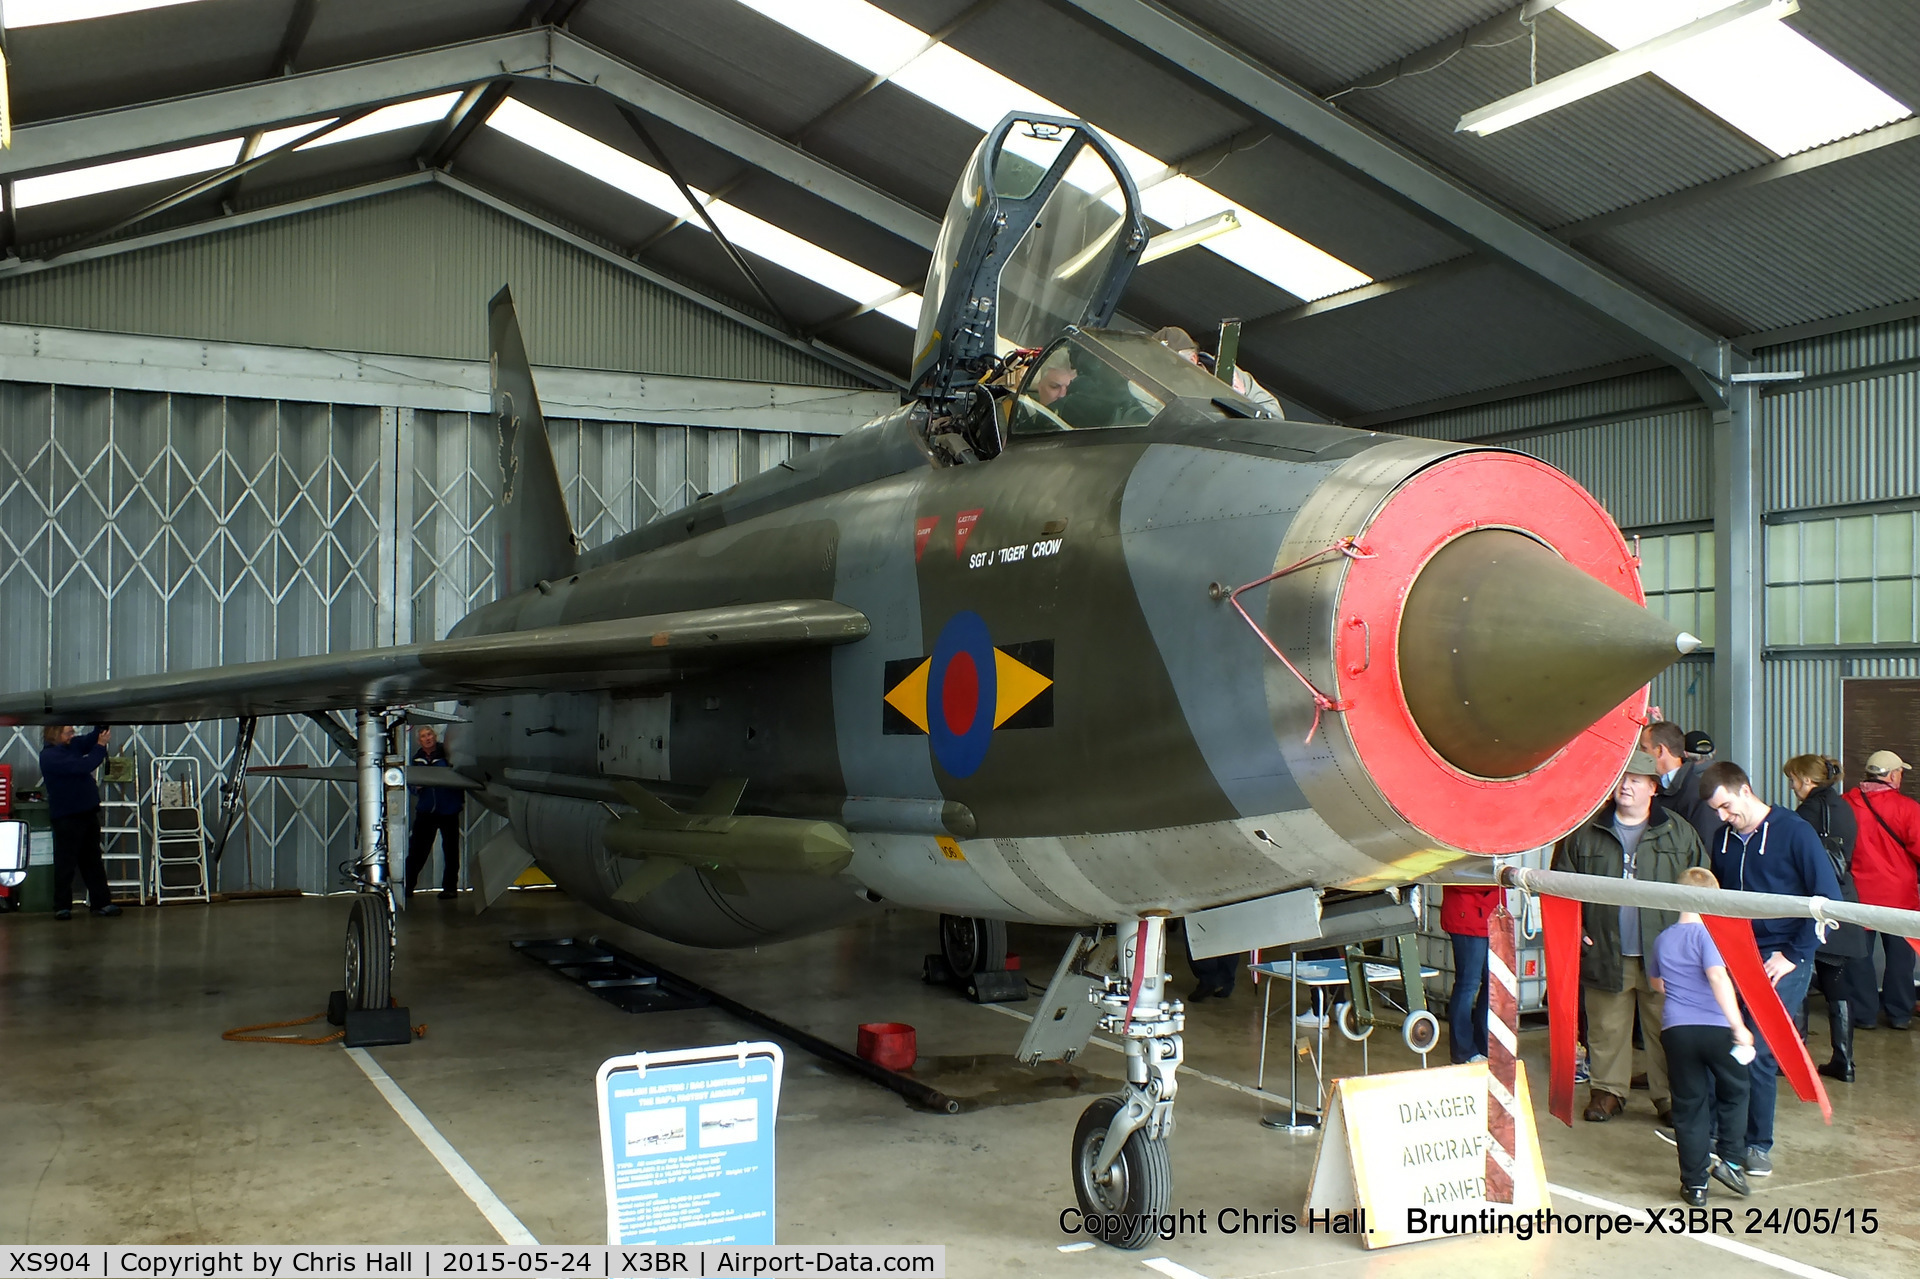 XS904, 1966 English Electric Lightning F.6 C/N 95250, at the Cold War Jets Open Day 2015